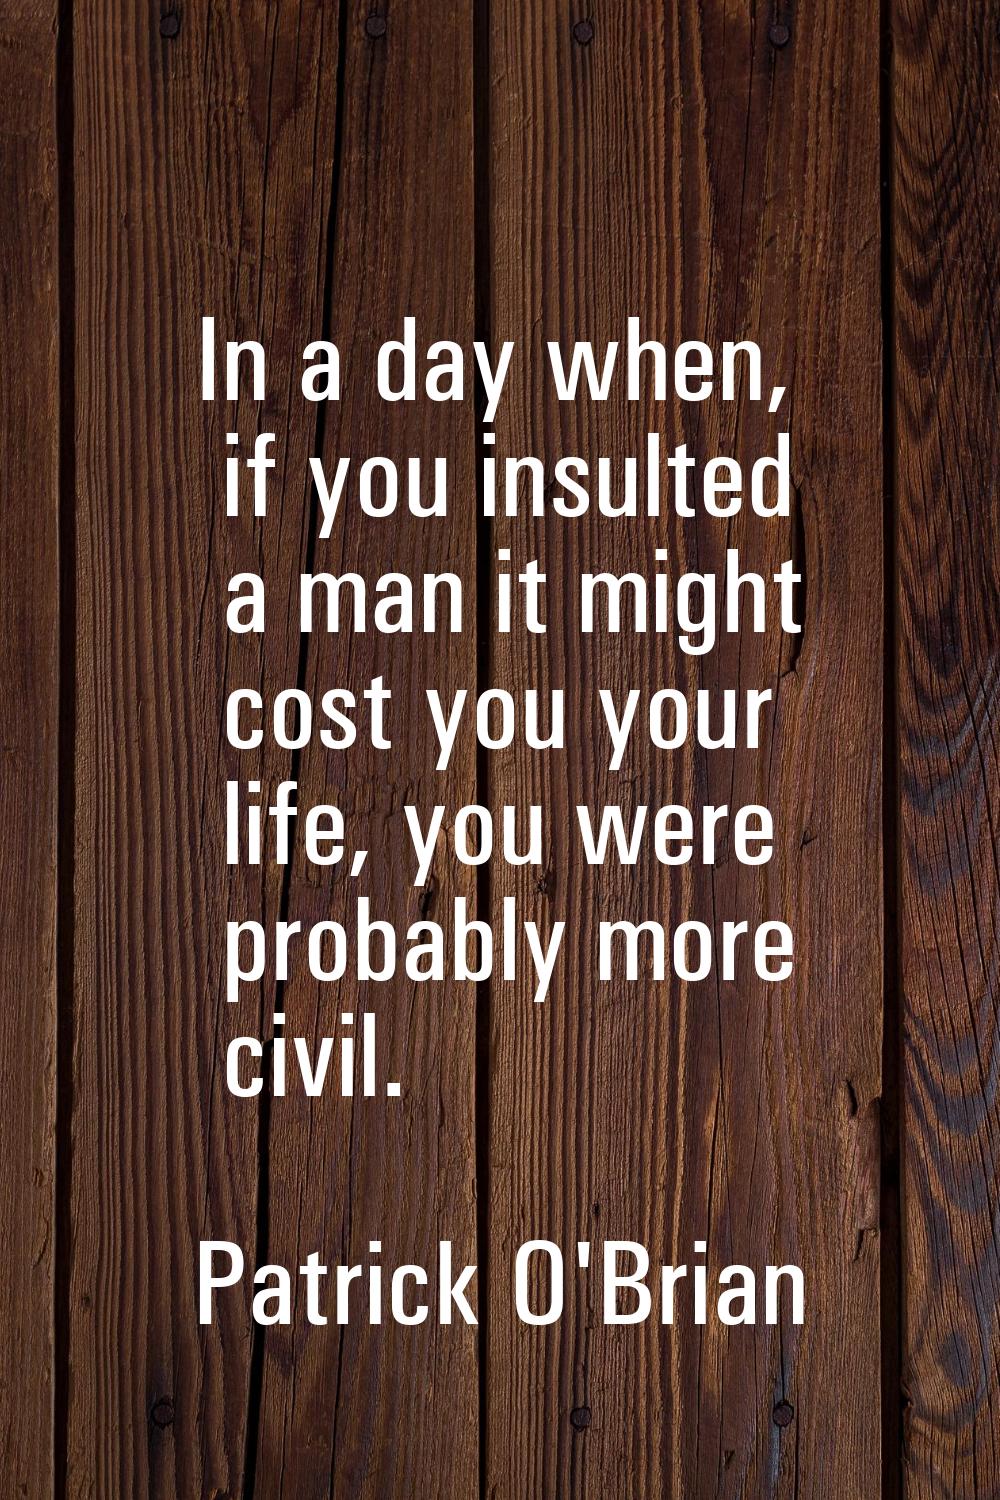 In a day when, if you insulted a man it might cost you your life, you were probably more civil.